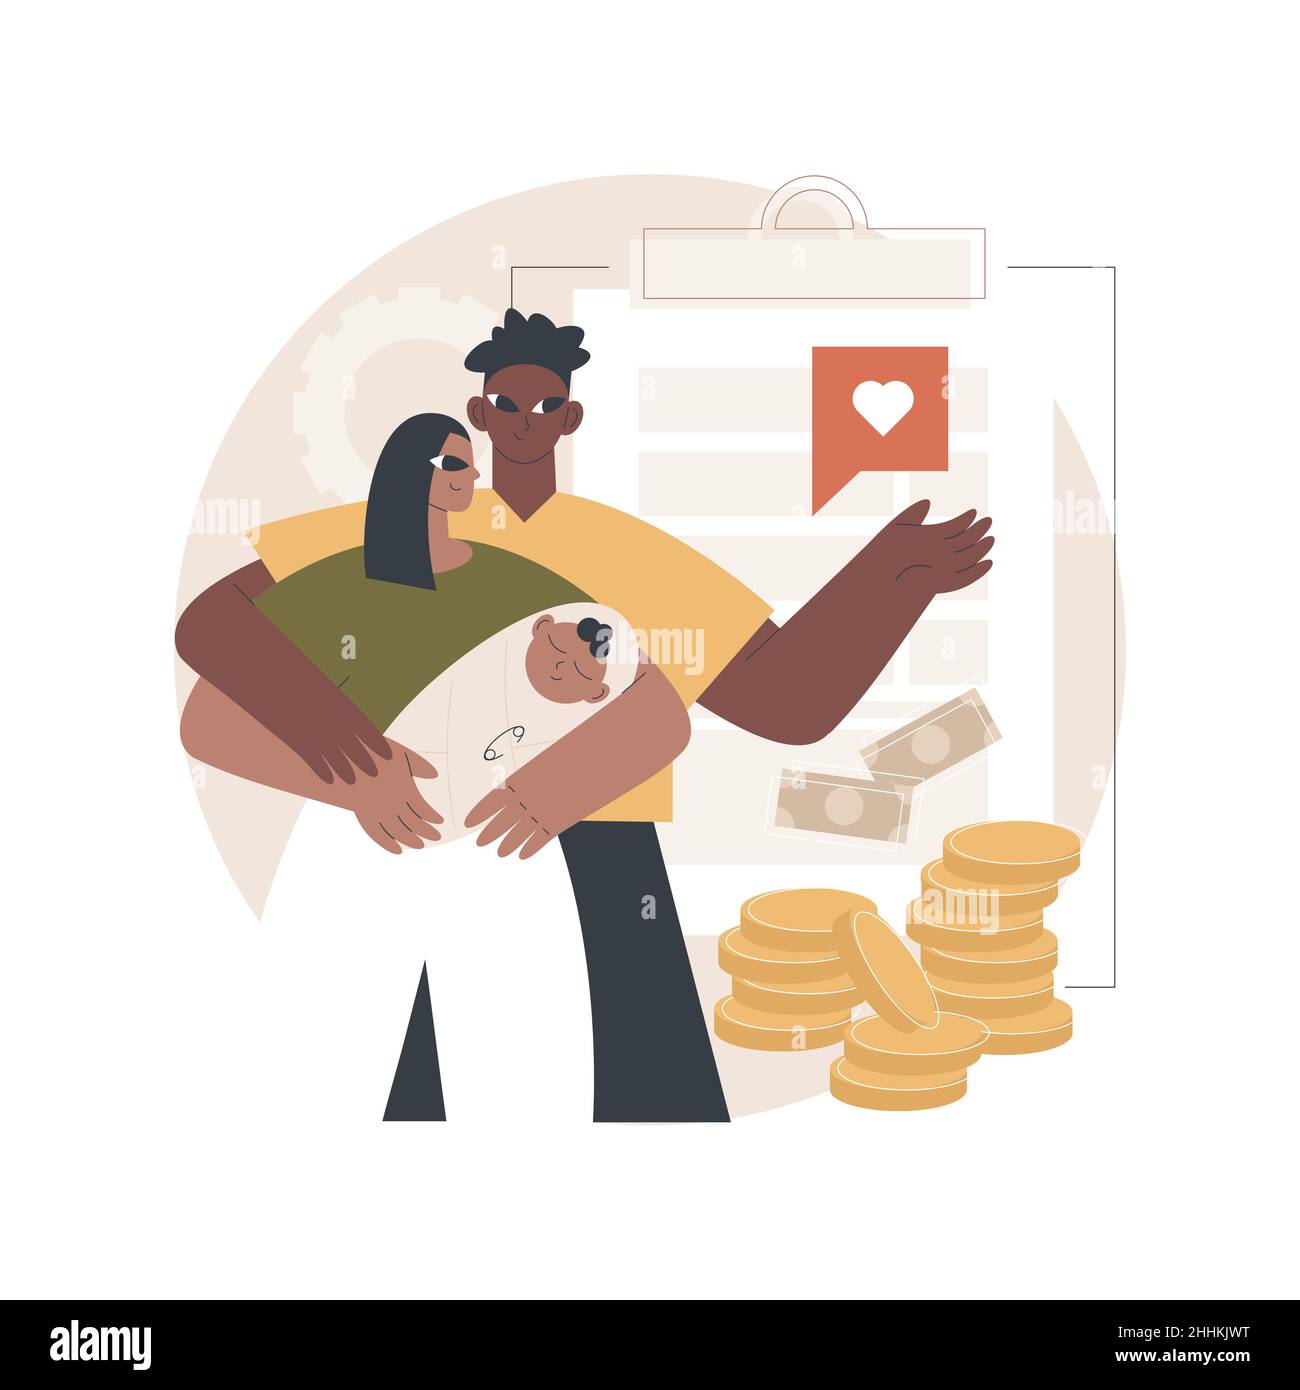 Child benefit abstract concept vector illustration. Dependent care costs, benefit plan, family income, budget planning, working parents support, social wealth, money in cash abstract metaphor. Stock Vector